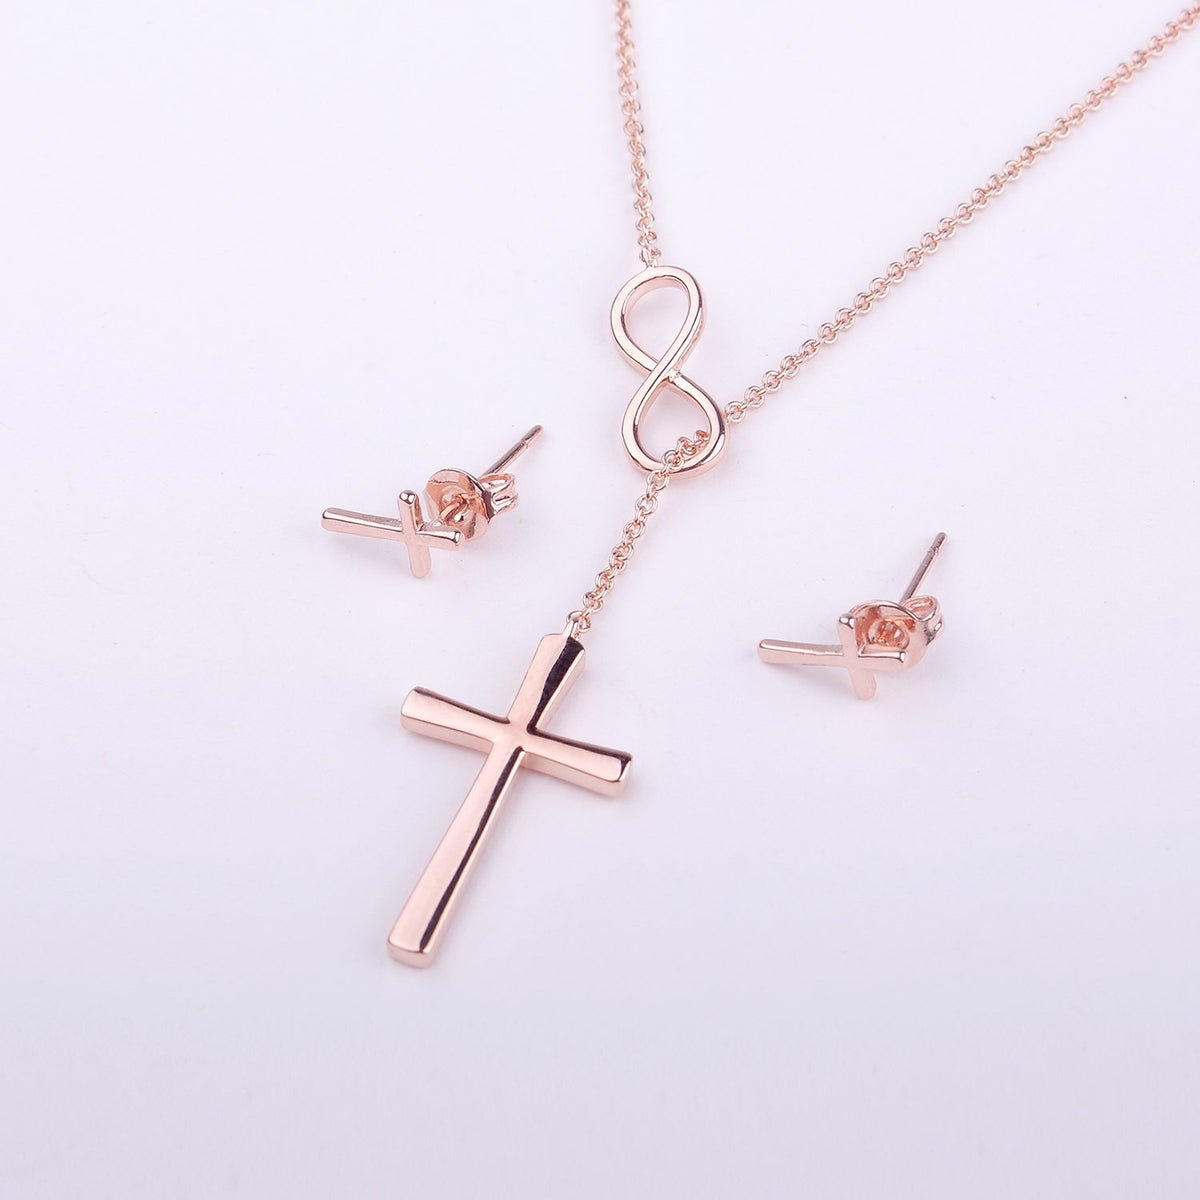 Christmas Gift for Mom Cross earring and Necklace Set Jewelry Set